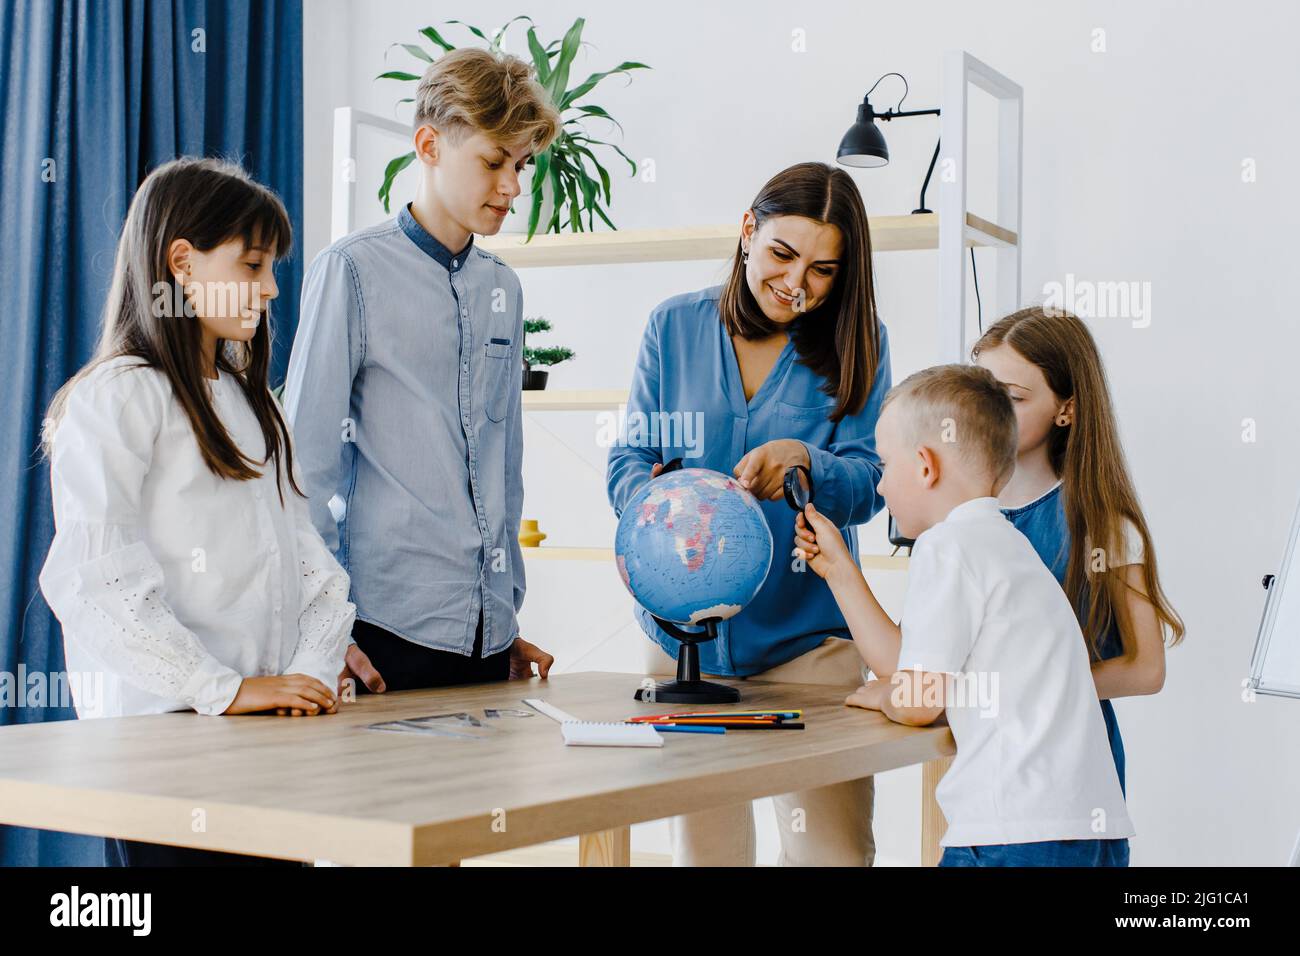 Teacher and children in class are looking at globe, teacher helps explain the lesson to the children in the class at a desk. Educational school proces Stock Photo